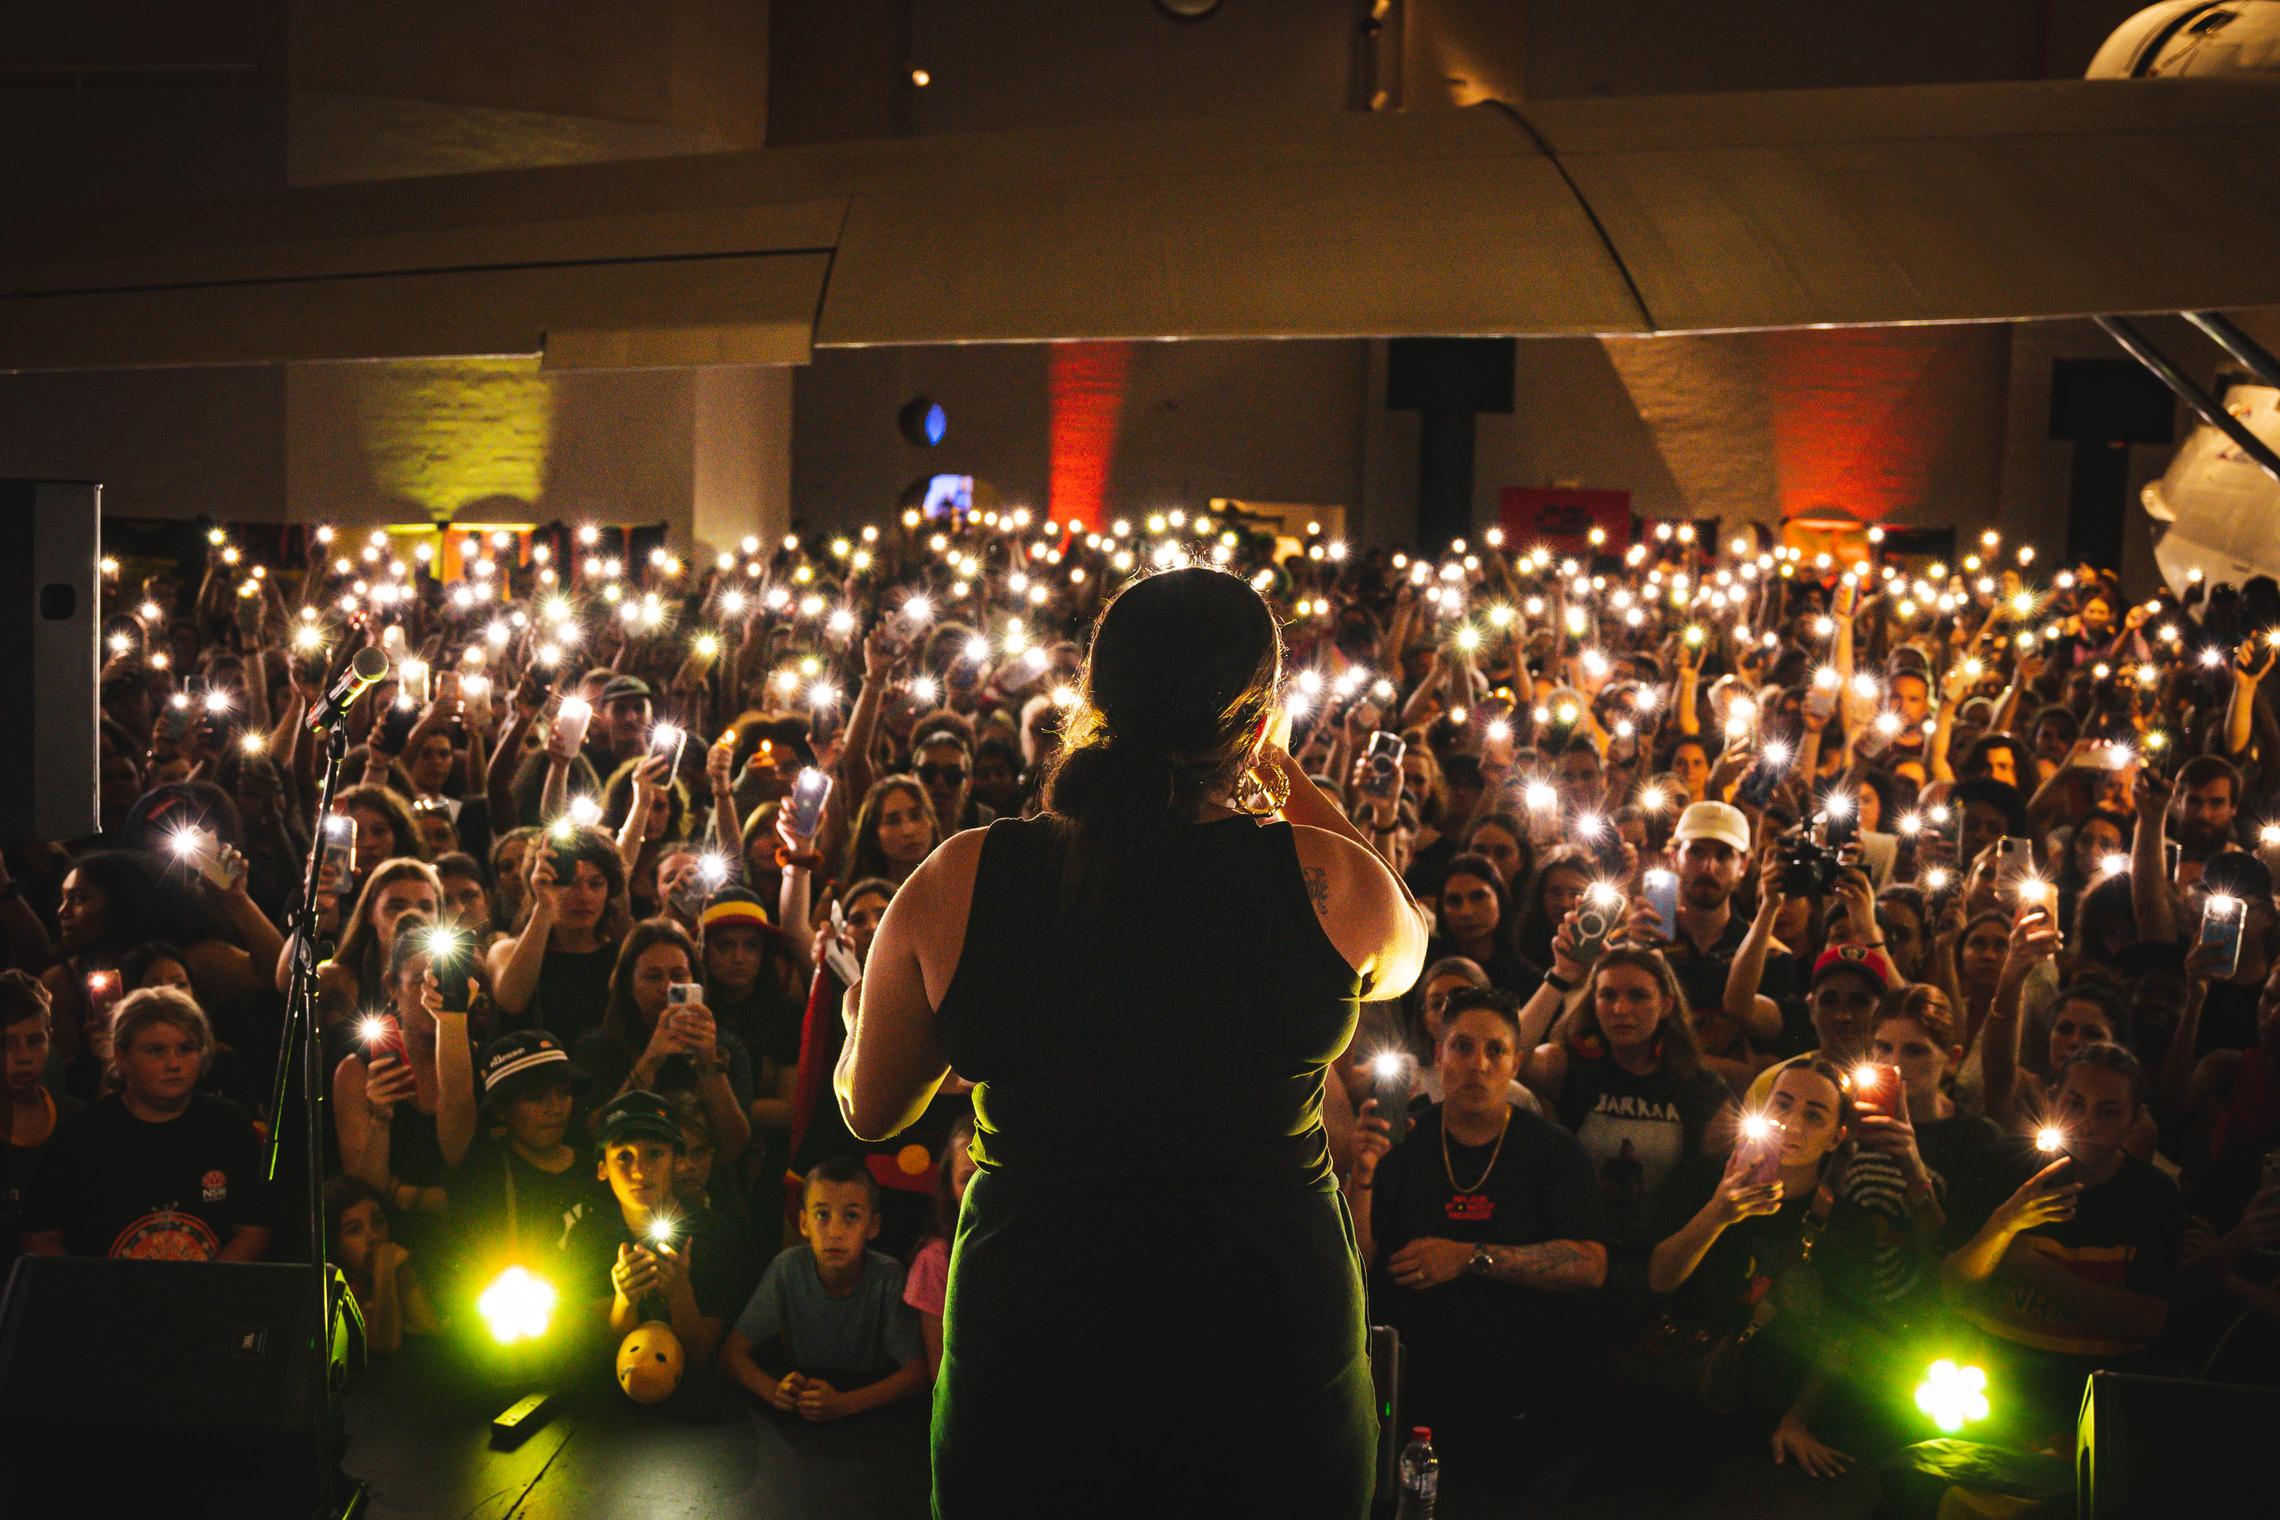 A woman performs in front of an audience who are holding their phone lights in the air.